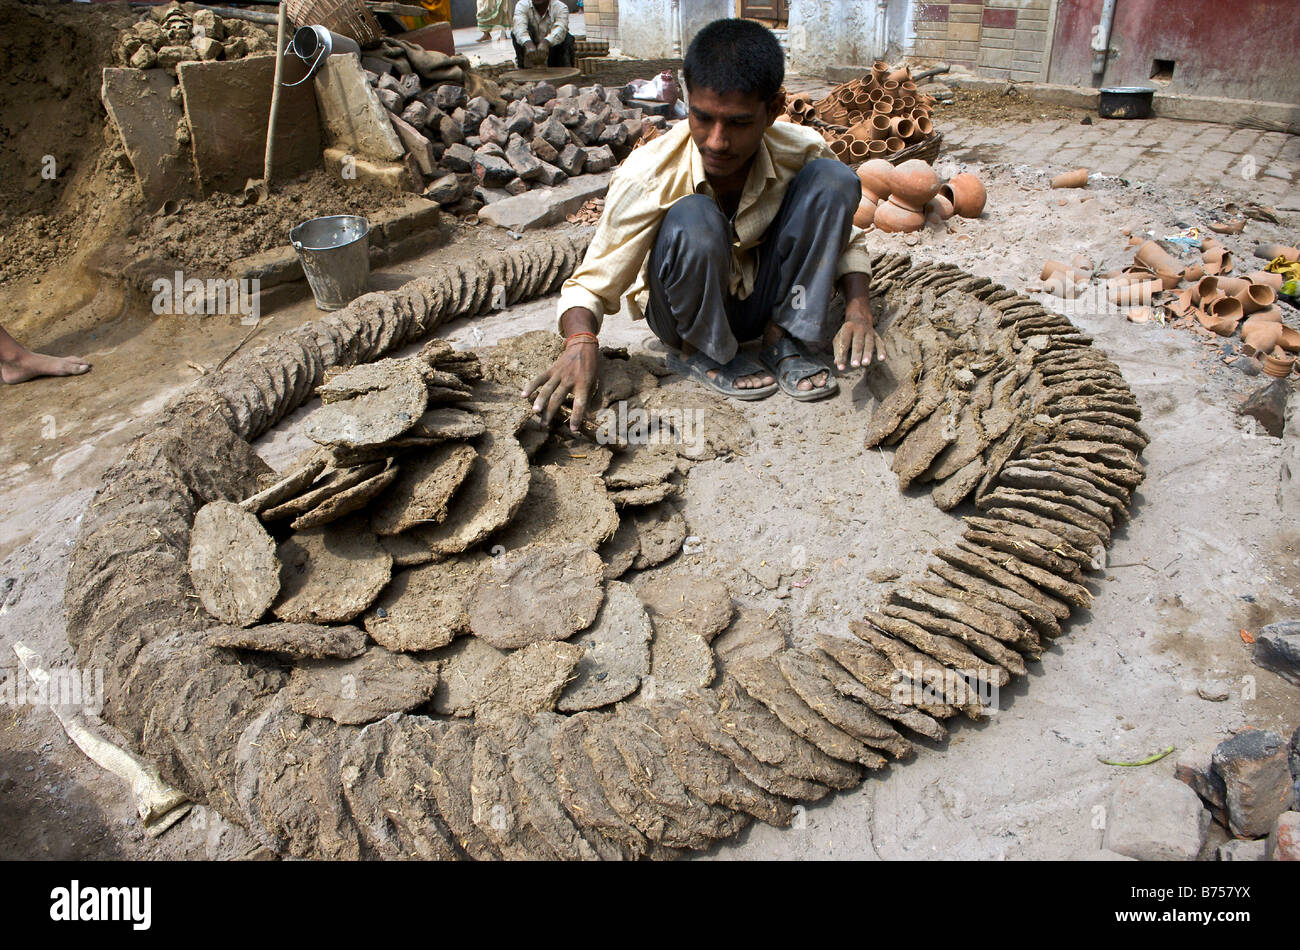 india-vrindavan-cow-dung-dried-and-used-as-cooking-fuel-B757YX.jpg